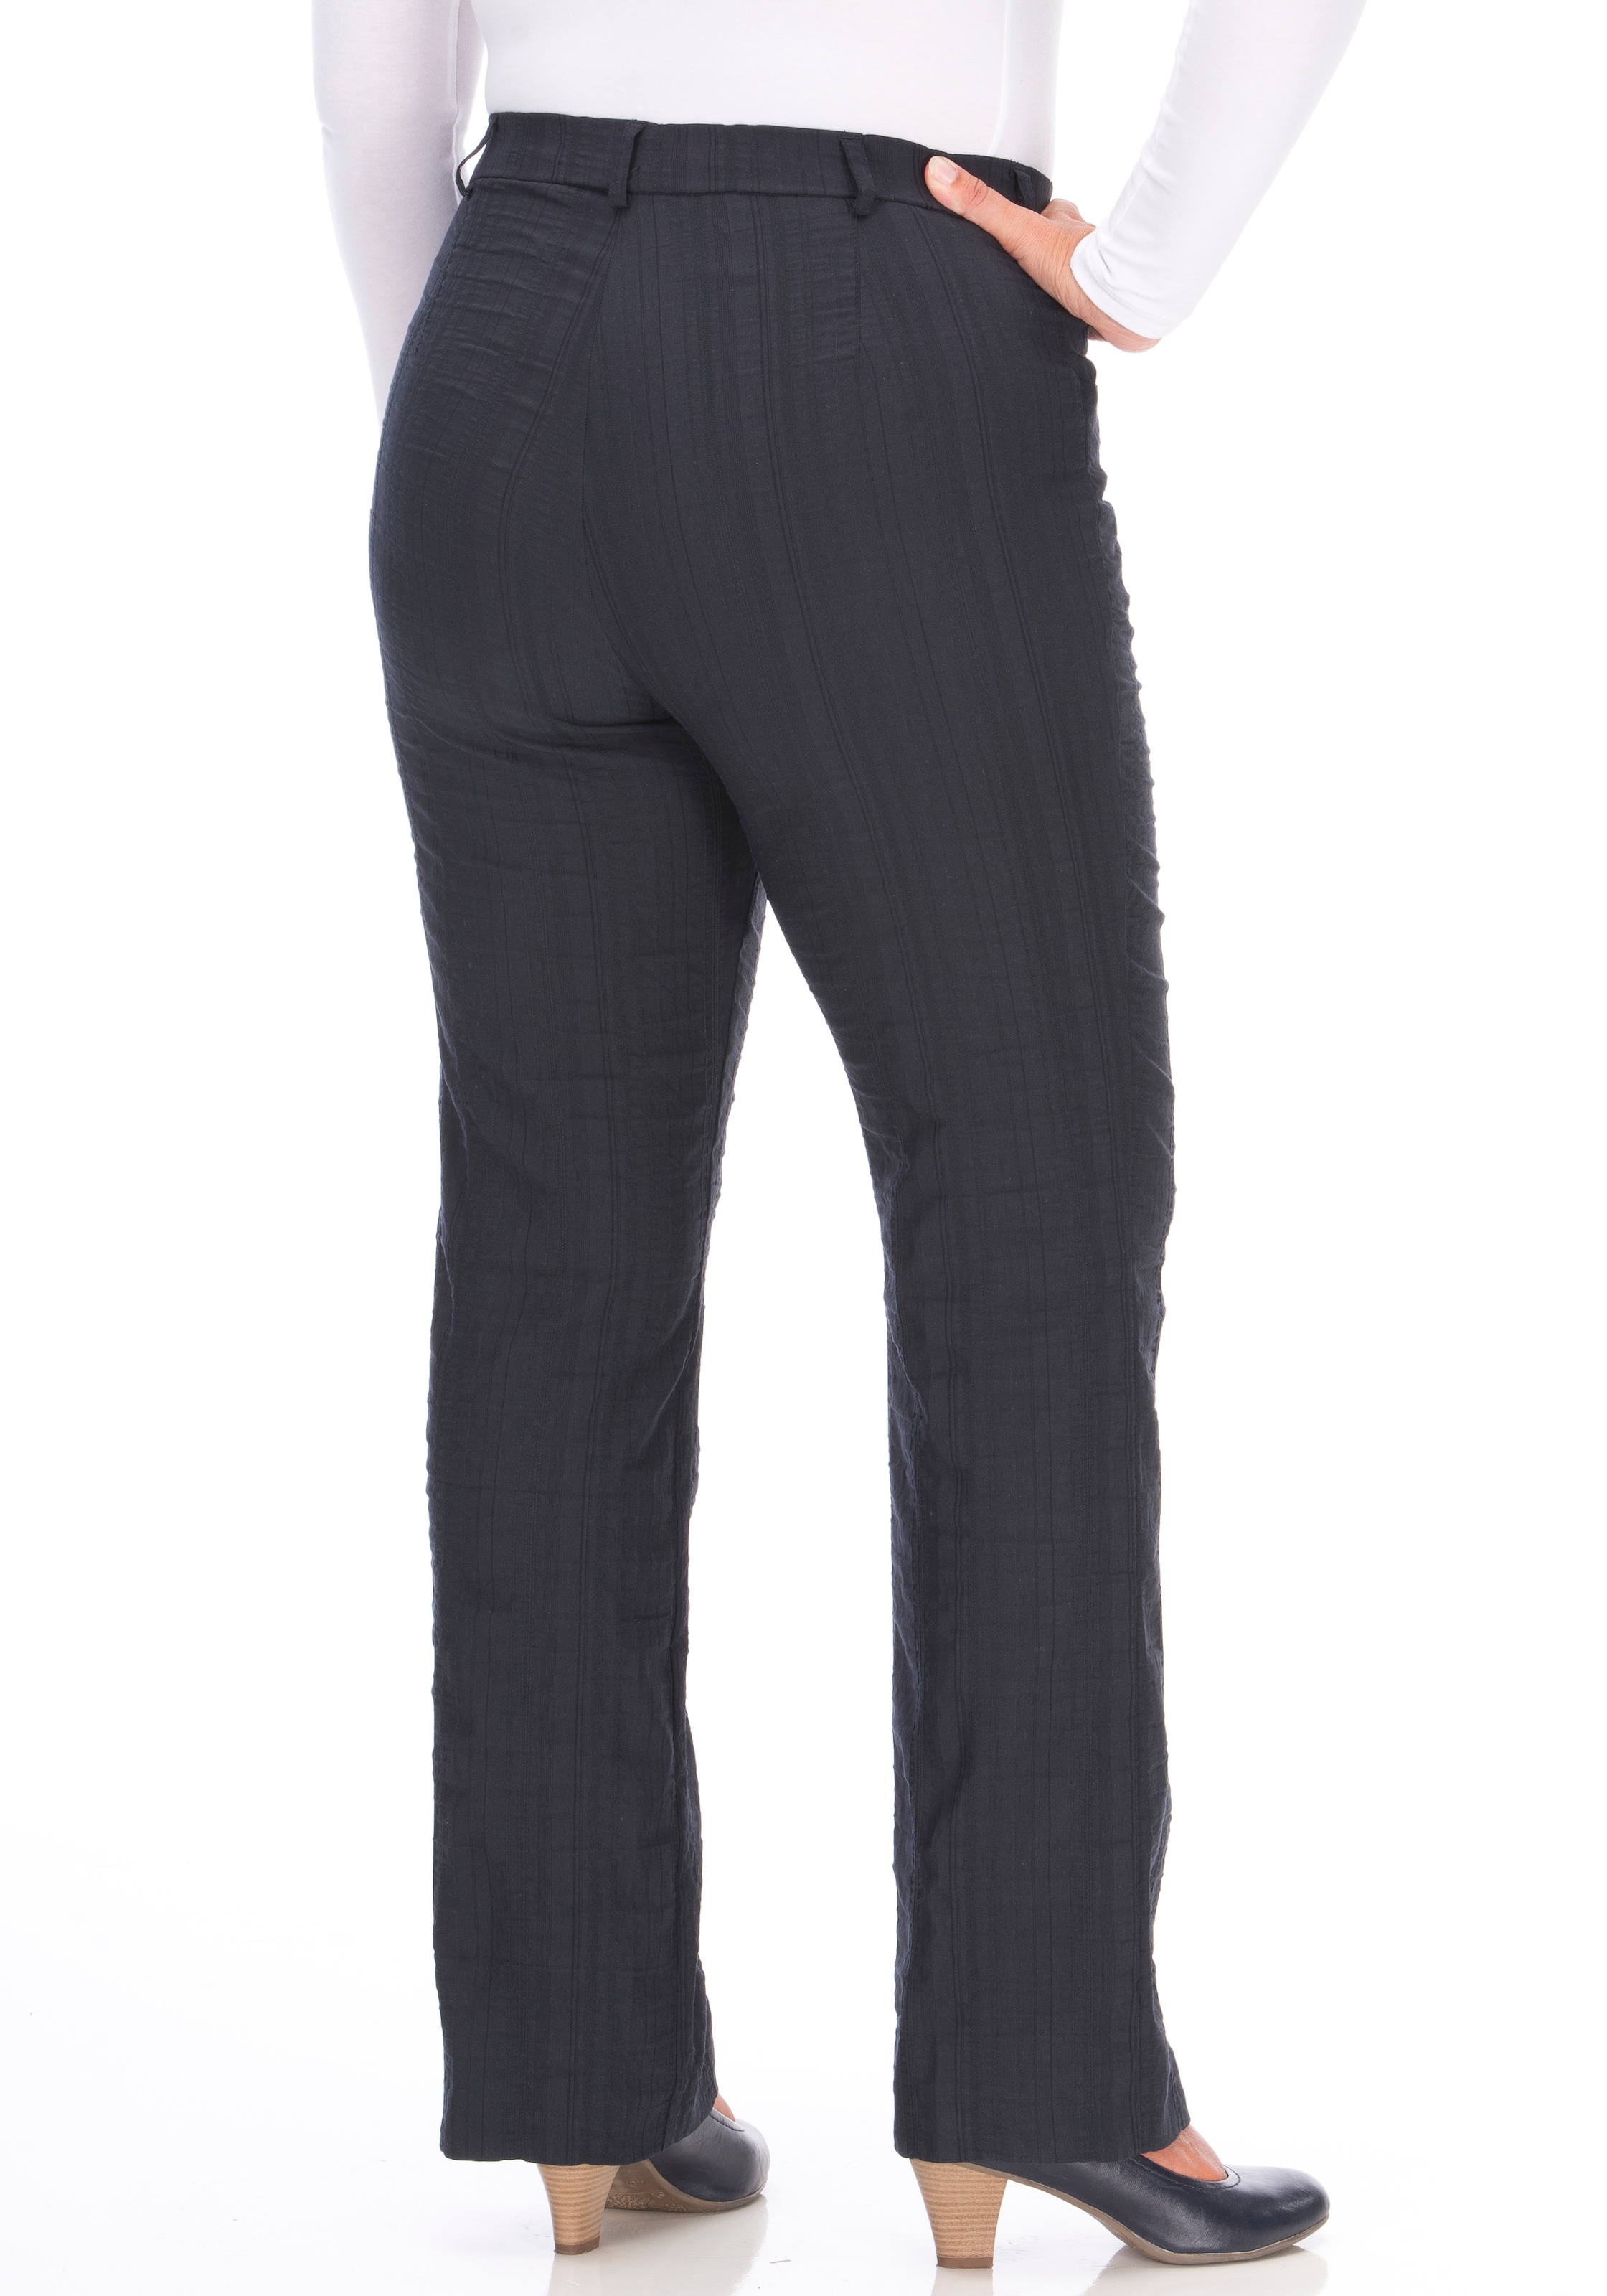 KjBRAND Stoffhose »Bea«, optimale ♕ bei Quer-Stretch Passform in